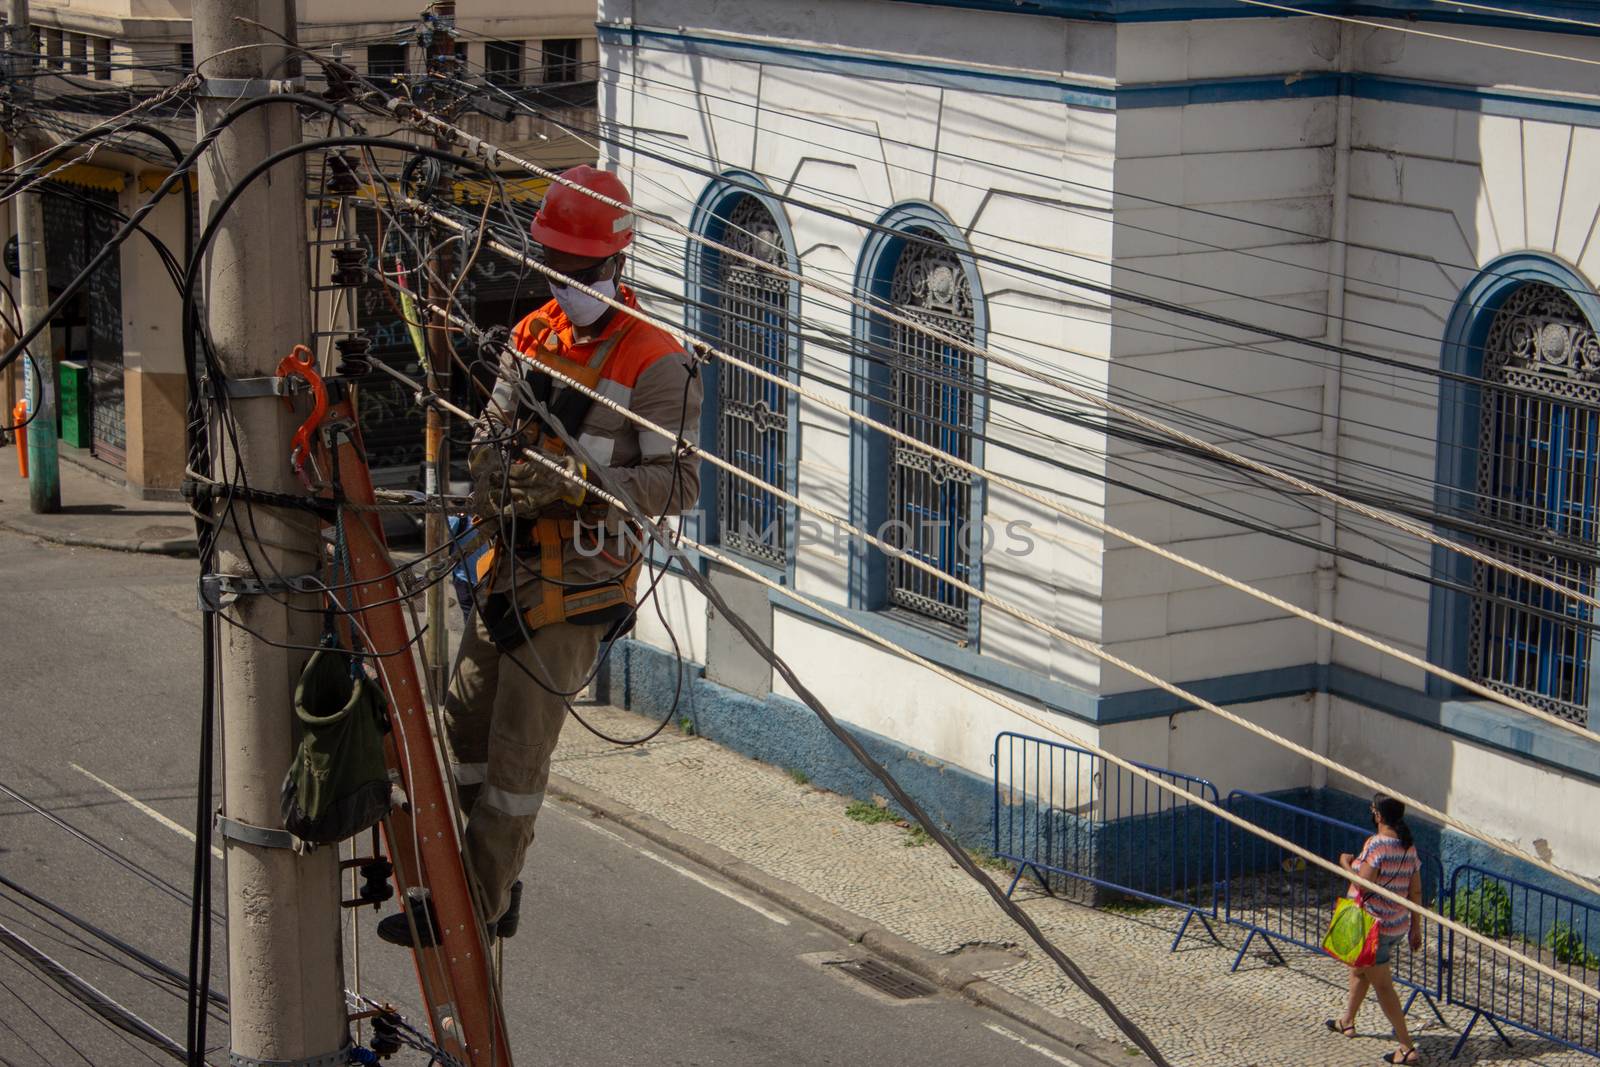 Men repairing electrical grid wires using masks because of COVID-19